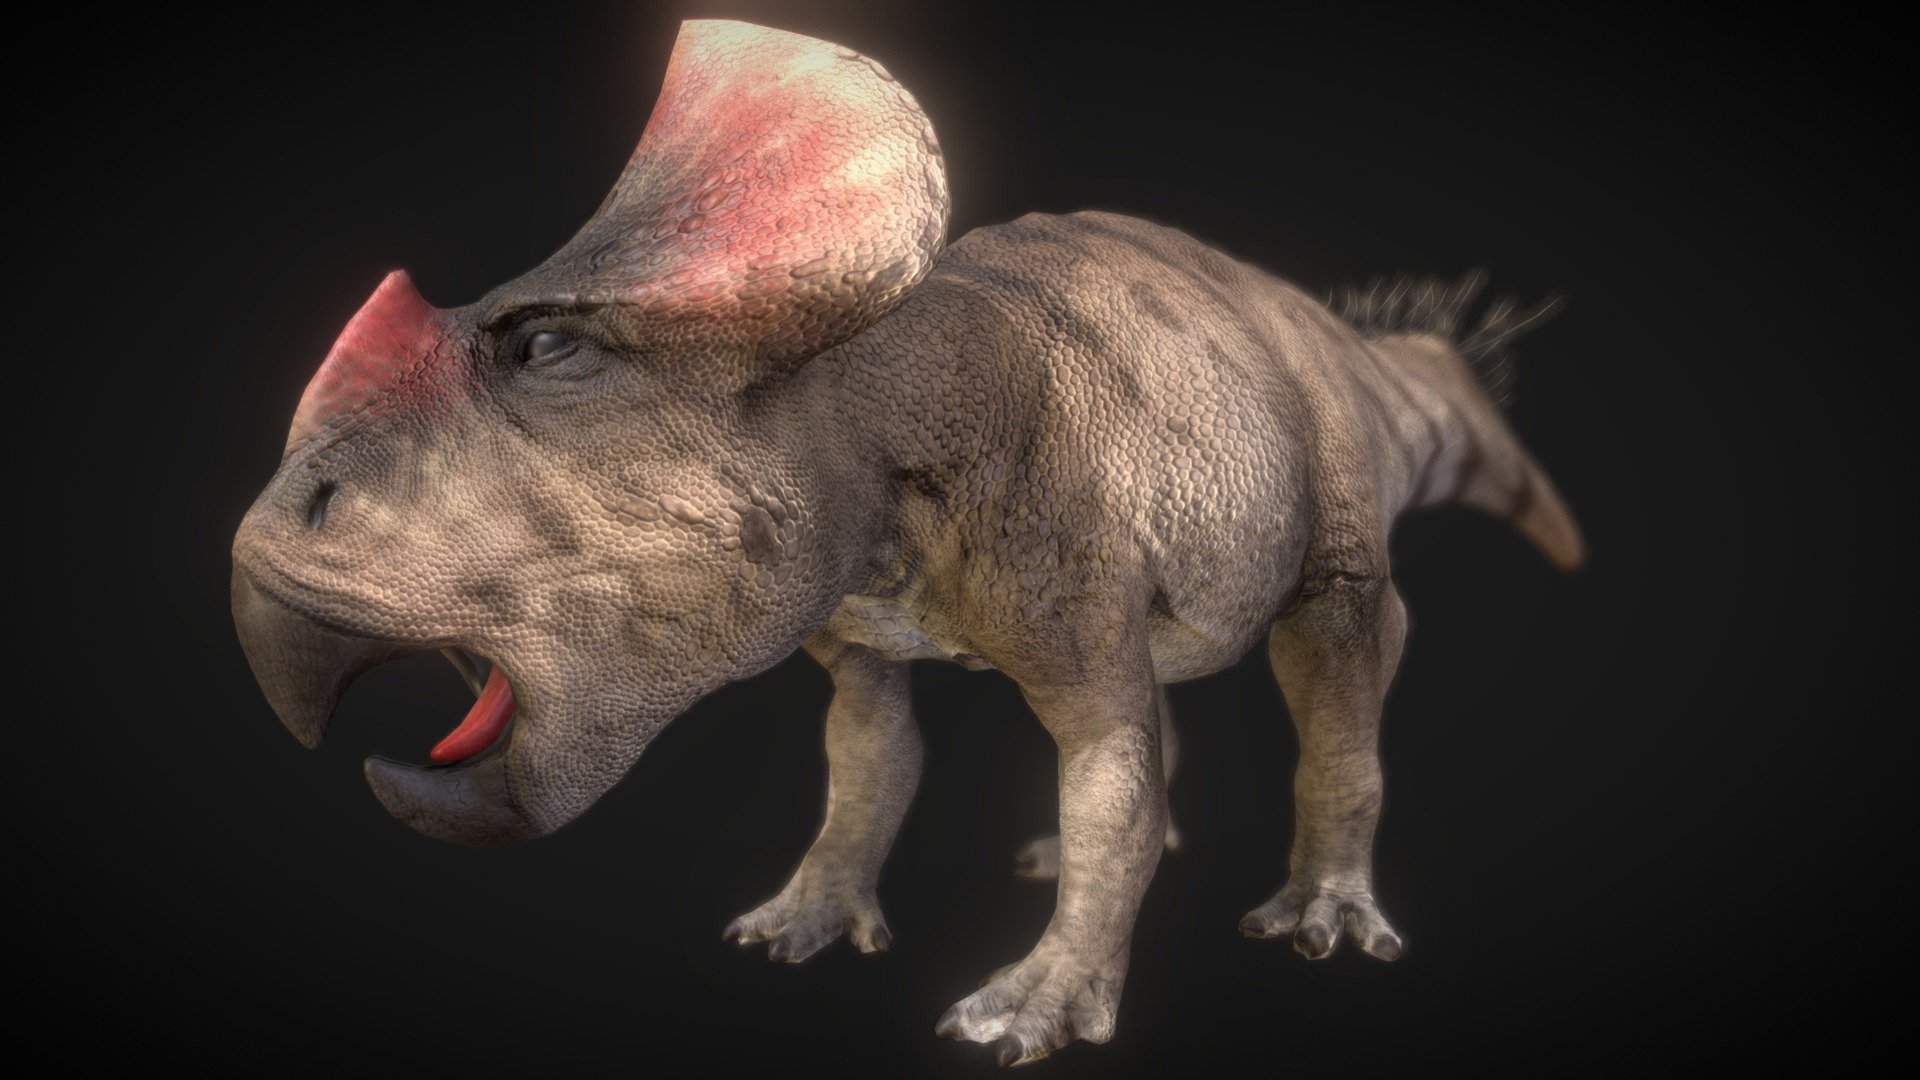 Protoceratops, a ceratopsian dinosaur from the Late Cretaceous period, steps into the prehistoric landscape with its distinctive frill and beak. This herbivorous dinosaur was a smaller relative of the later and more massive ceratopsians like Triceratops.

Characterized by its compact size, quadrupedal stance, and a beak adapted for cropping vegetation, Protoceratops was a common sight in the ancient deserts and plains of what is now Mongolia. Fossilized nests and eggs of Protoceratops have been discovered, shedding light on its reproductive behavior.

Explore the Late Cretaceous world with Protoceratops, a dinosaur that played a role in the diverse ecosystems of its time. Uncover the mysteries of this ceratopsian with - Protoceratops - Buy Royalty Free 3D model by robertfabiani 3d model